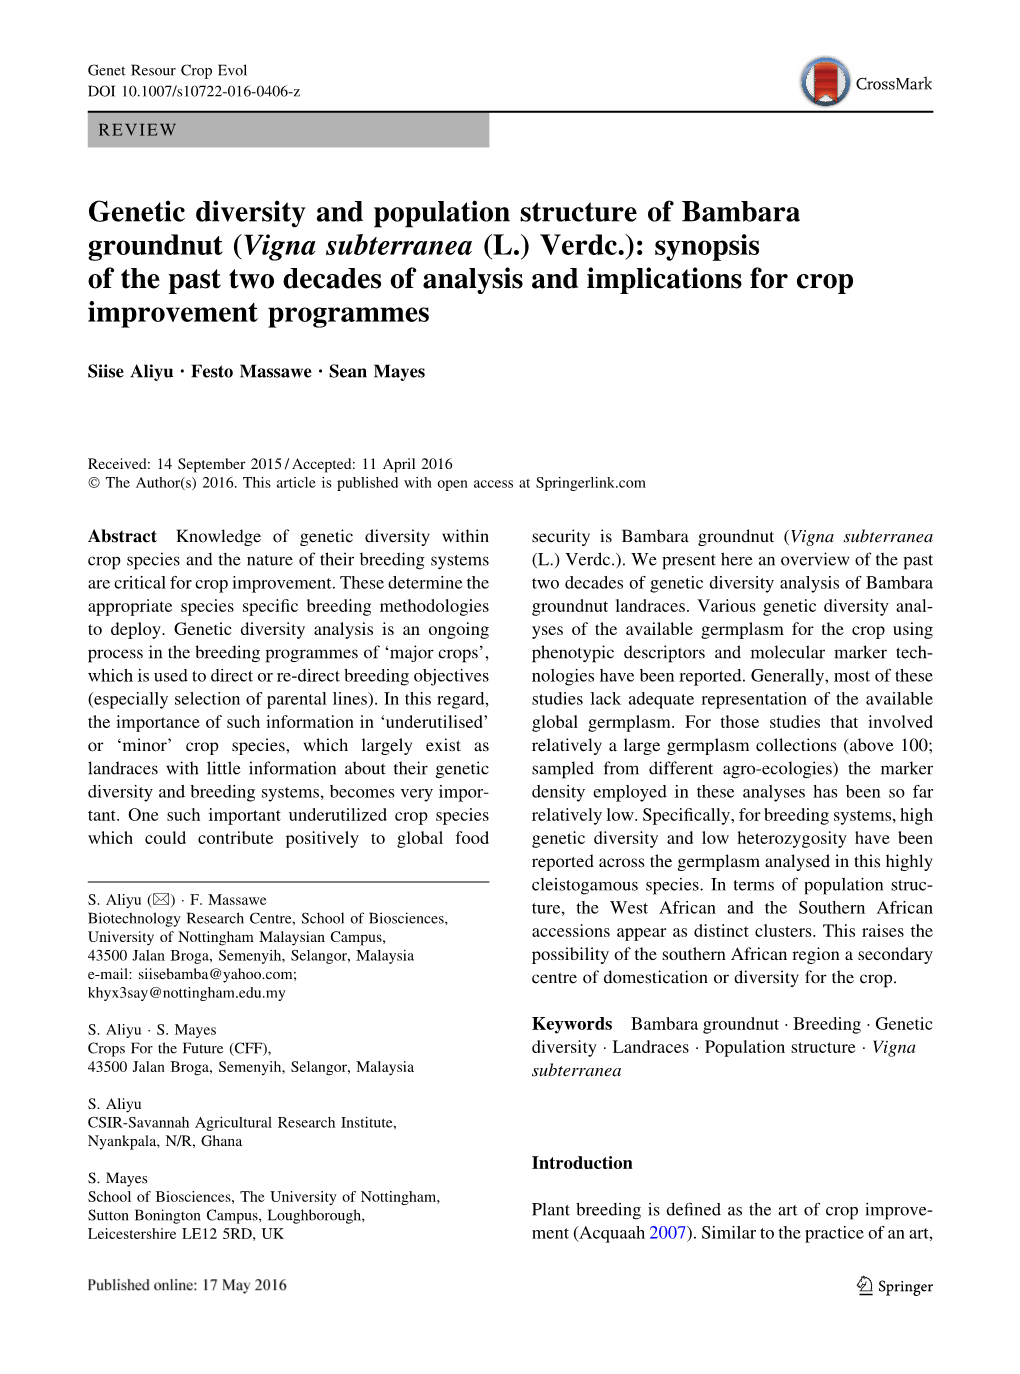 Genetic Diversity and Population Structure of Bambara Groundnut